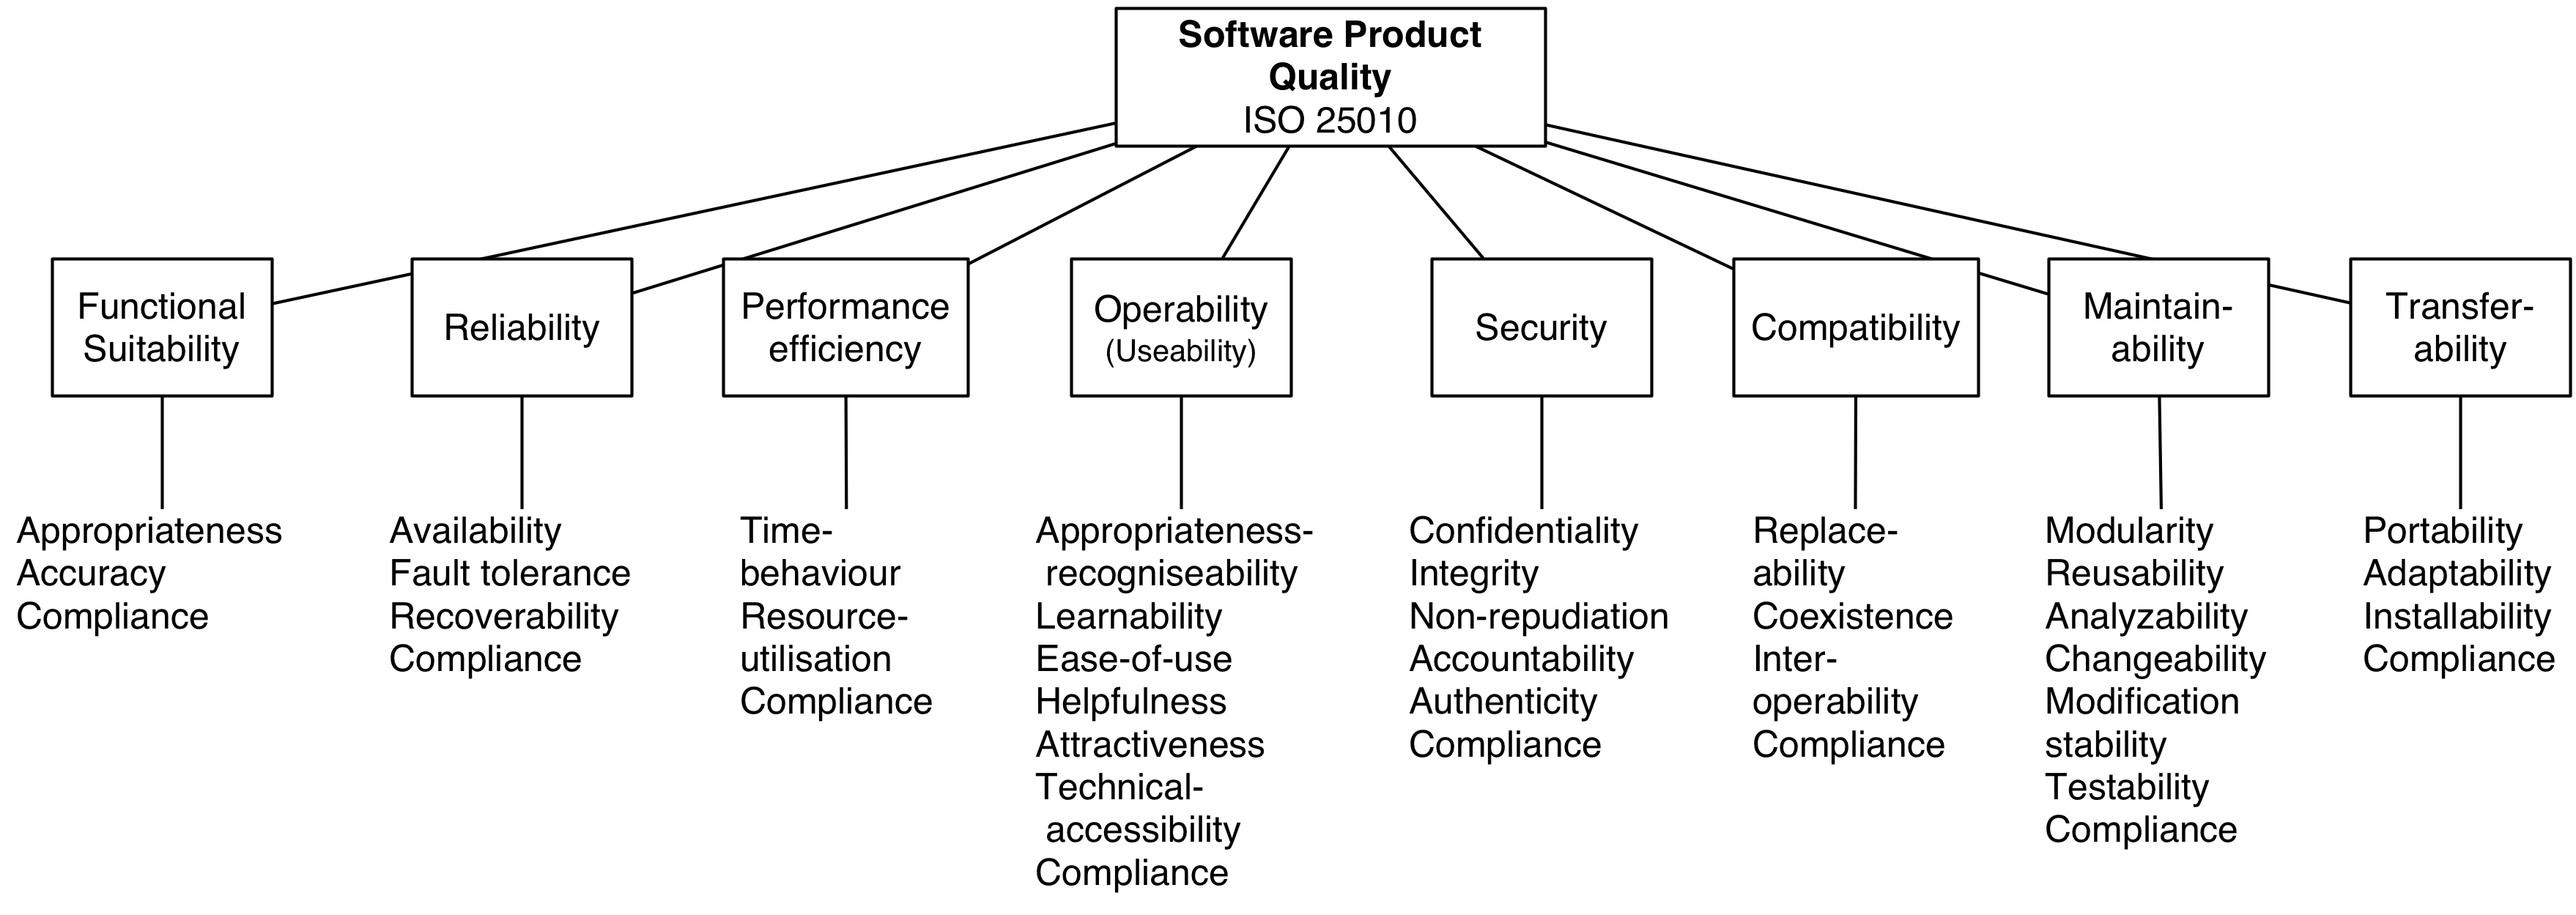 Software Product Quality